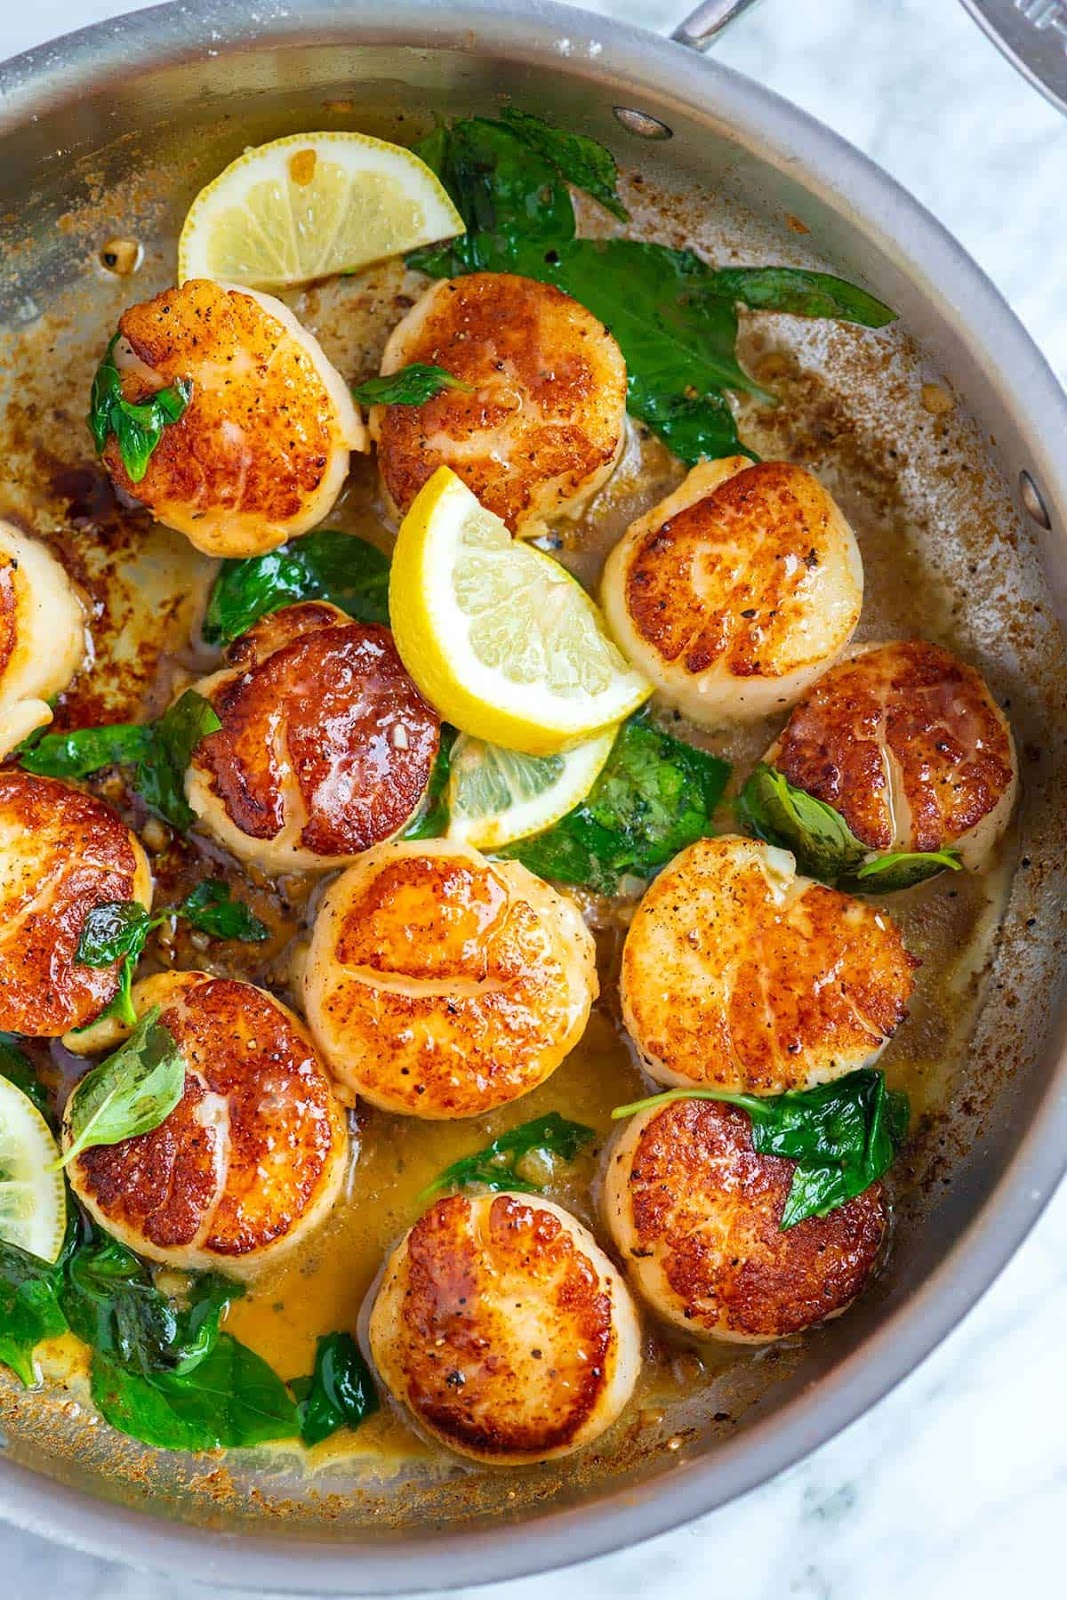 Seared Scallops with Garlic Basil Butter - NEWS RECIPES